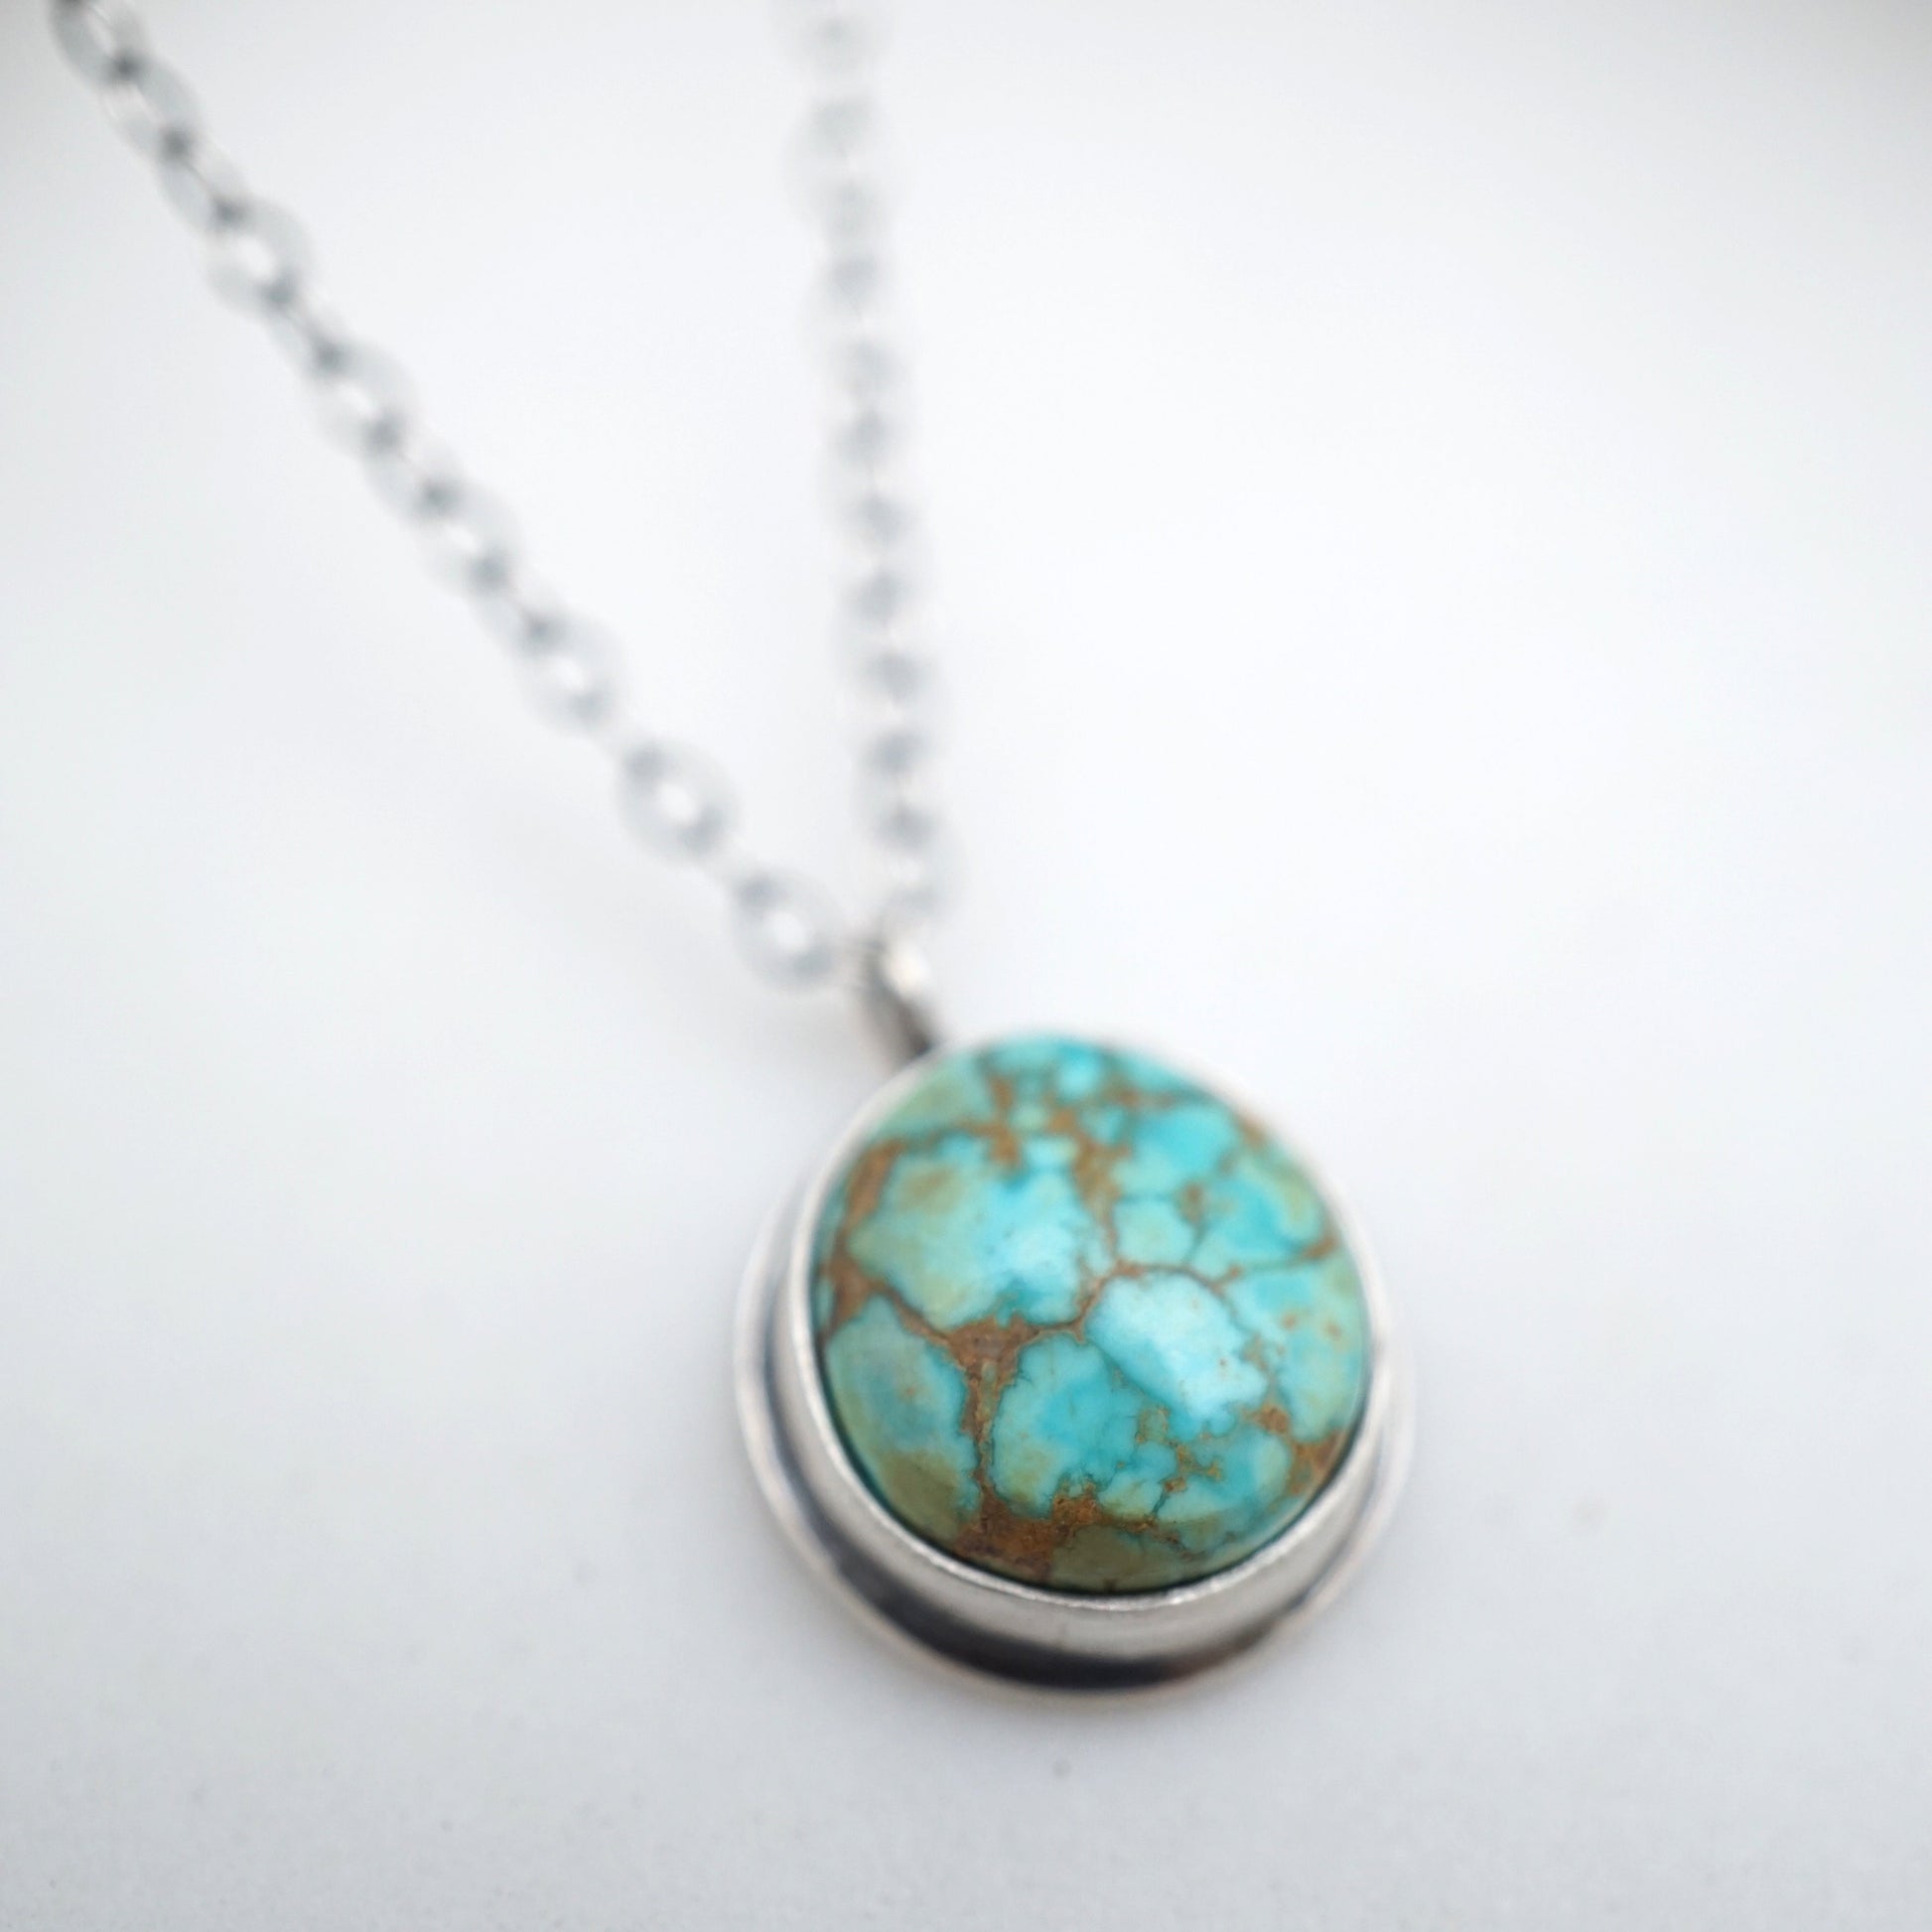 dainty turquoise mountain turquoise + silver necklace - 17" chain - Lumenrose